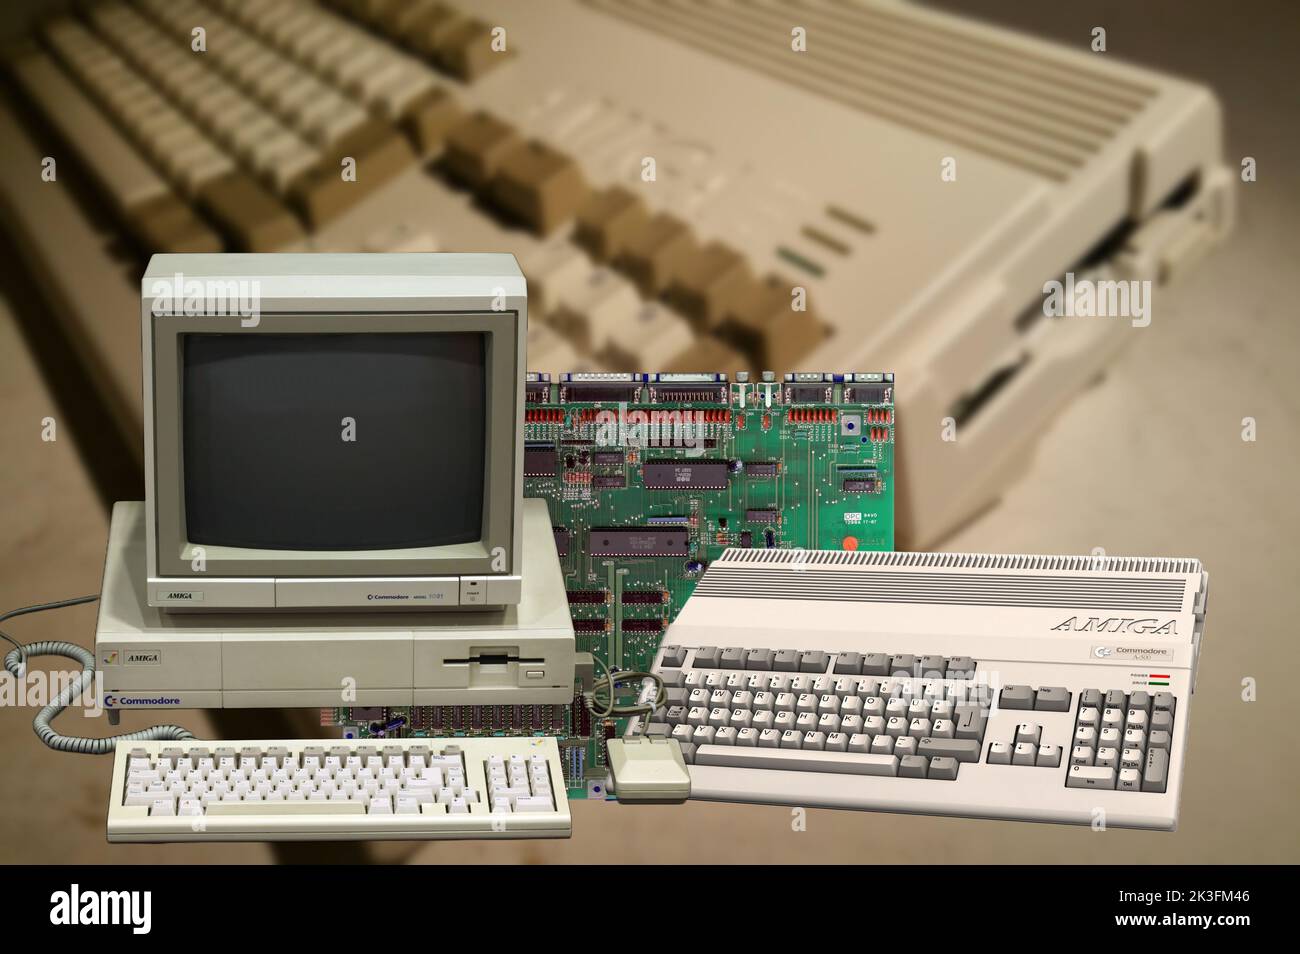 The Commodore Amiga is a Home Computer that was hugely commercially successful in the late 1980s. Stock Photo